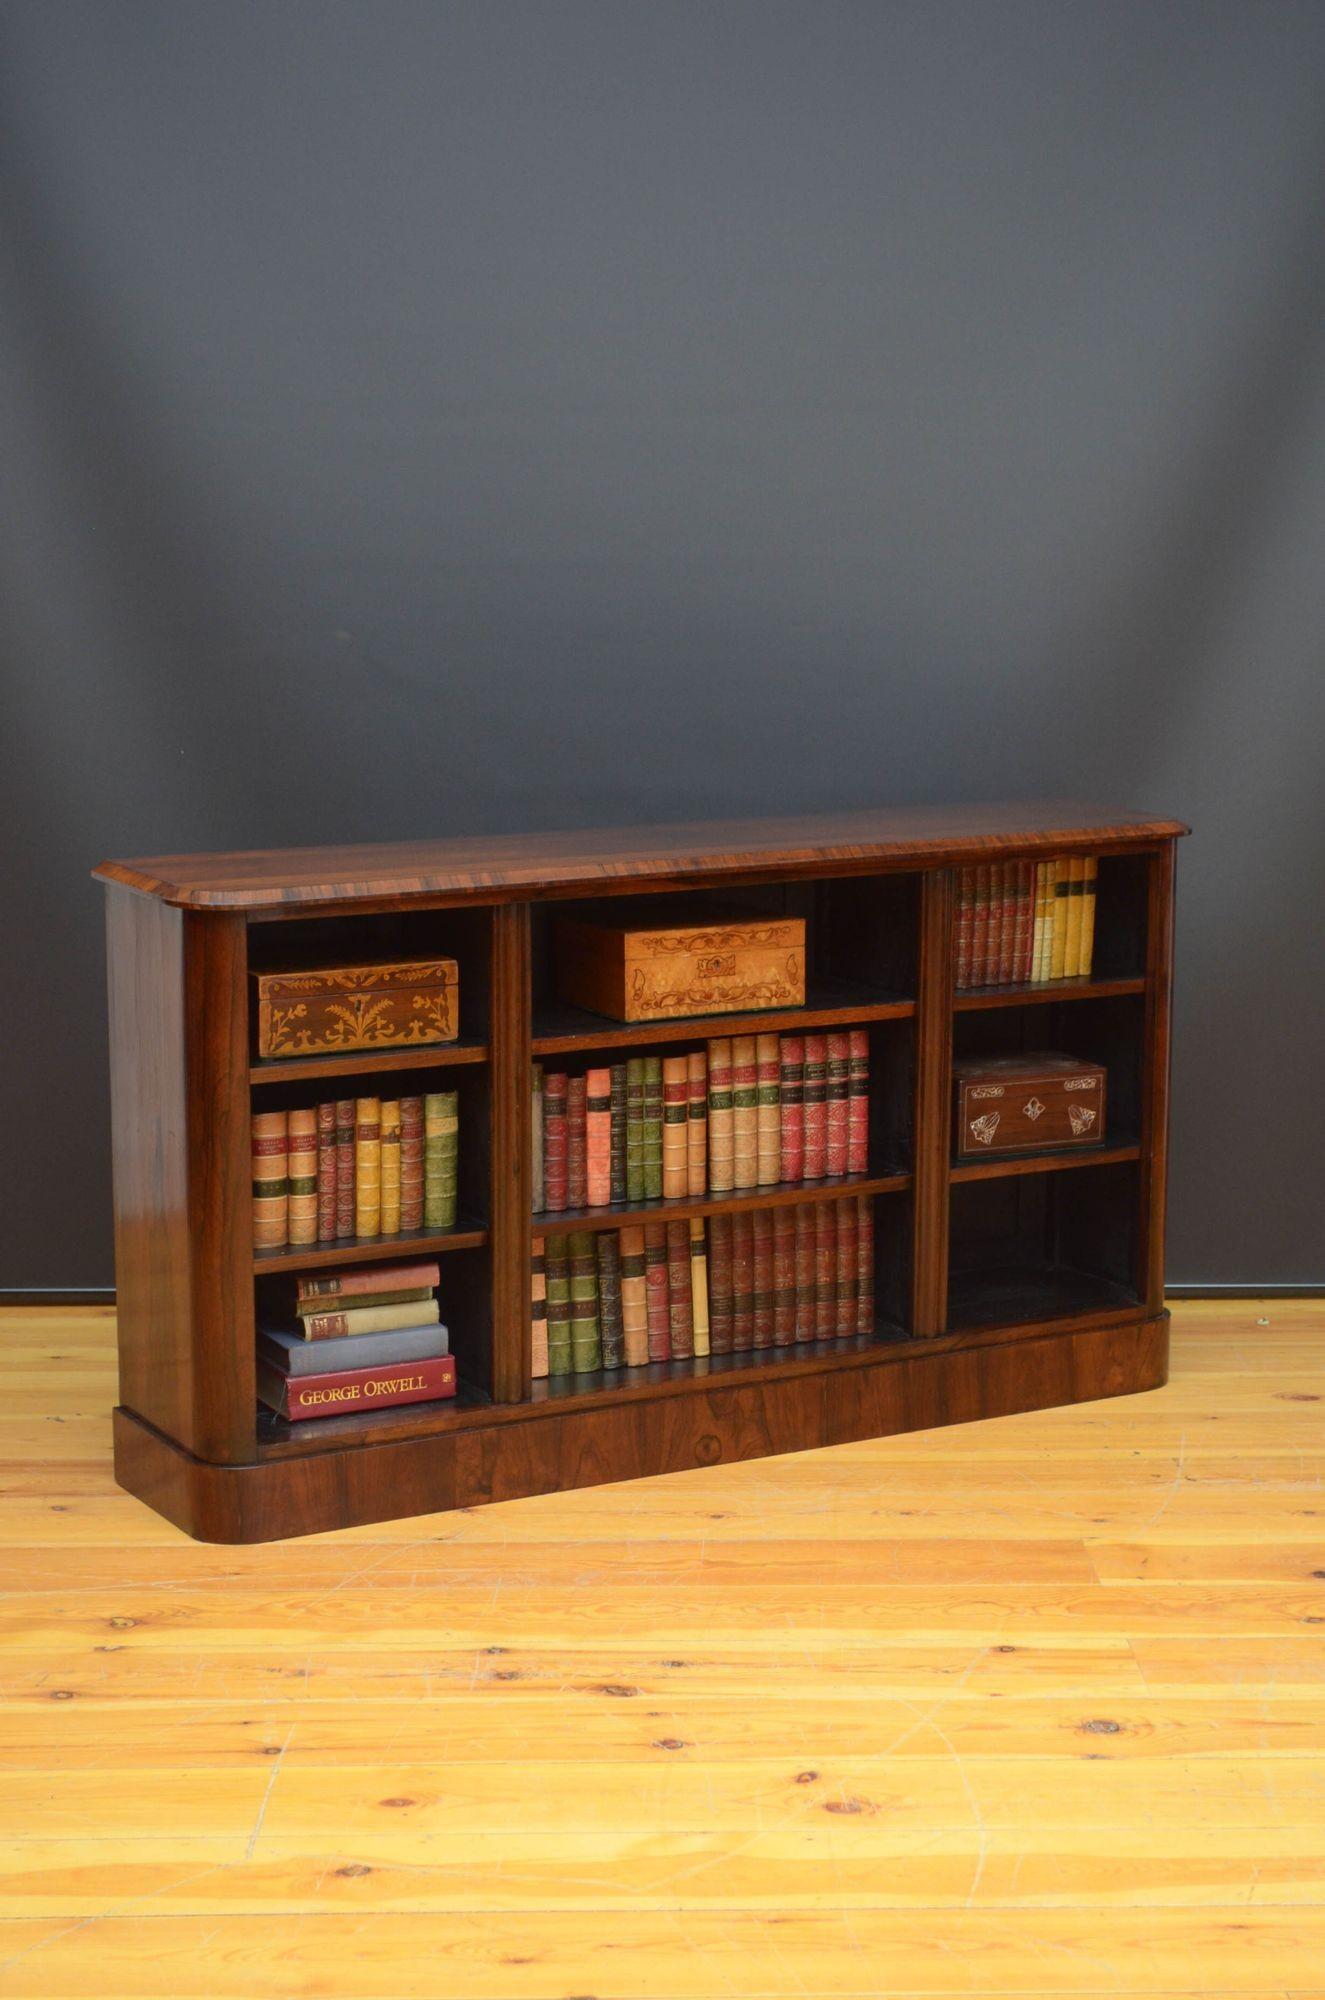 wide low bookcase